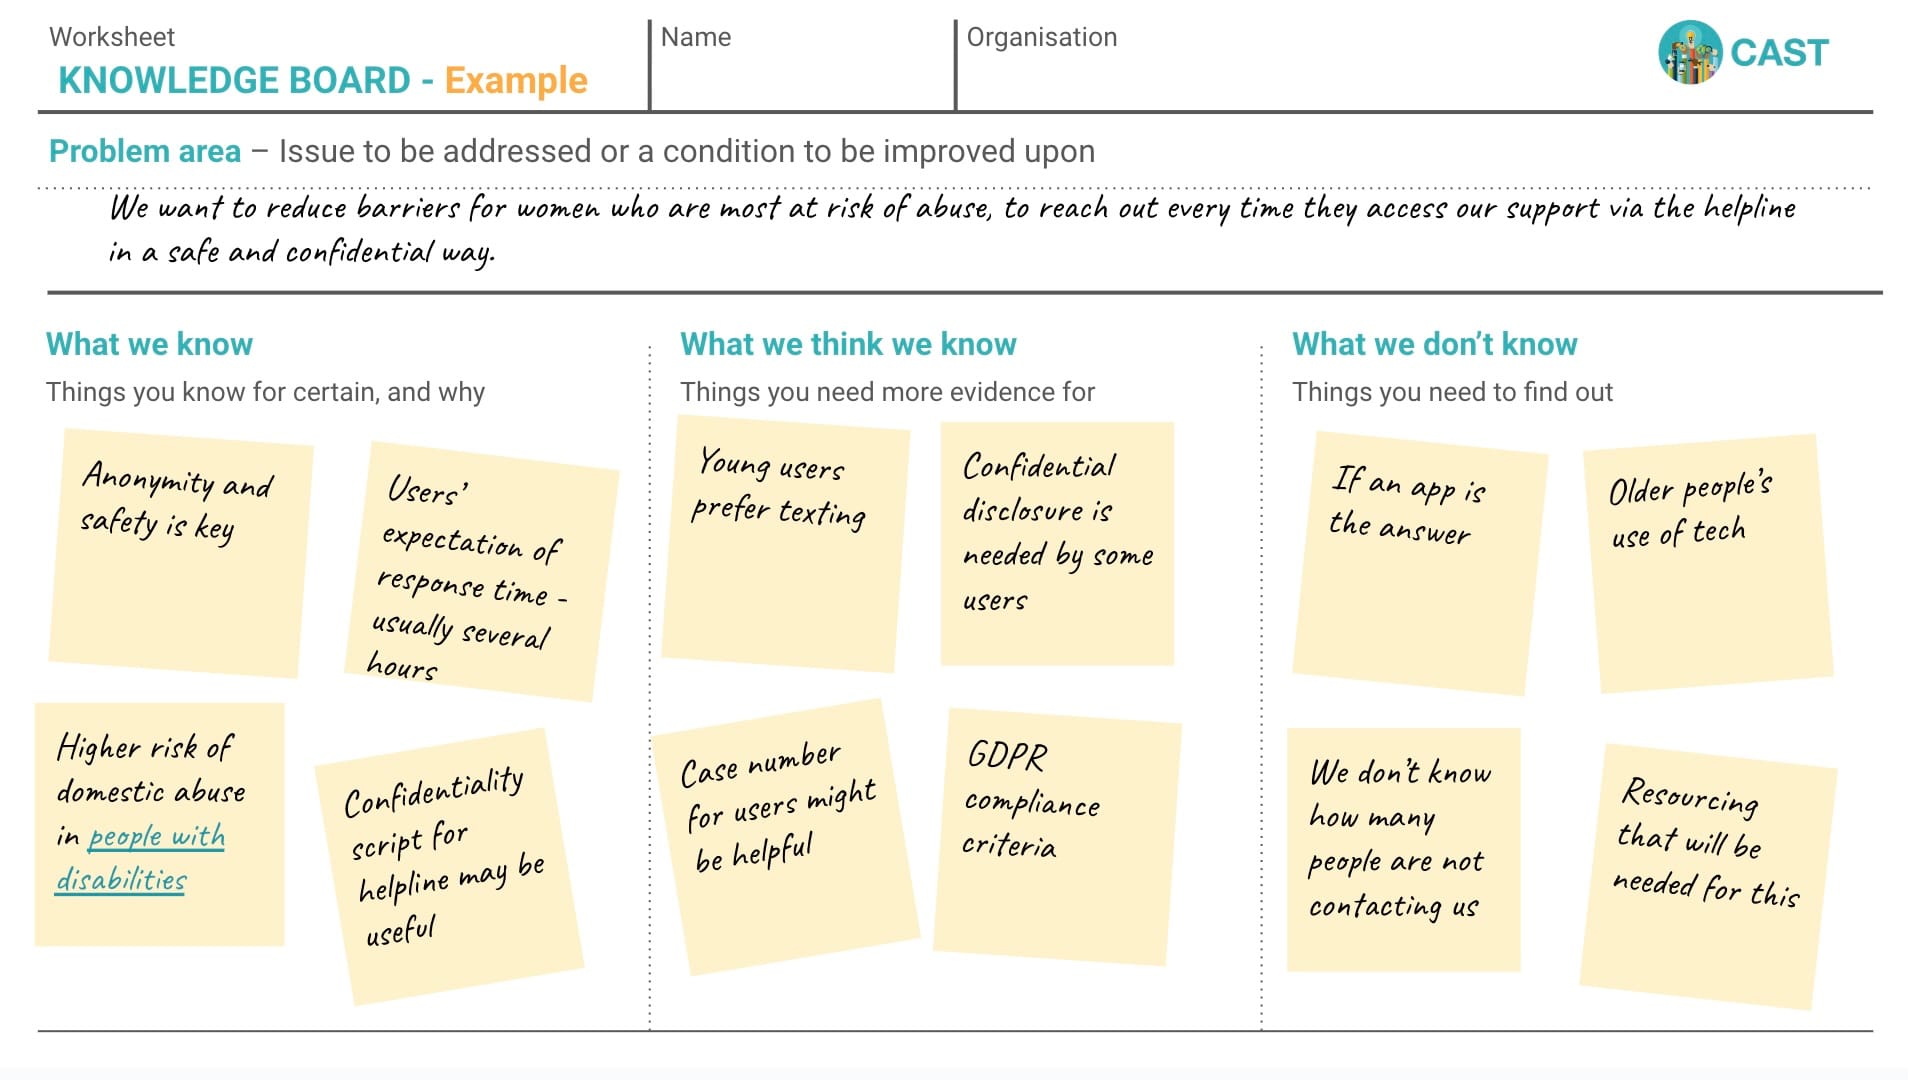 Example knowledge board created by CAST. It shows an example problem area ‘Issue to be addressed or a condition to be improved upon’, and three sections titled ‘What we know’, ‘What we think we know’, ‘What we don’t know’ with post-it notes filled with examples.